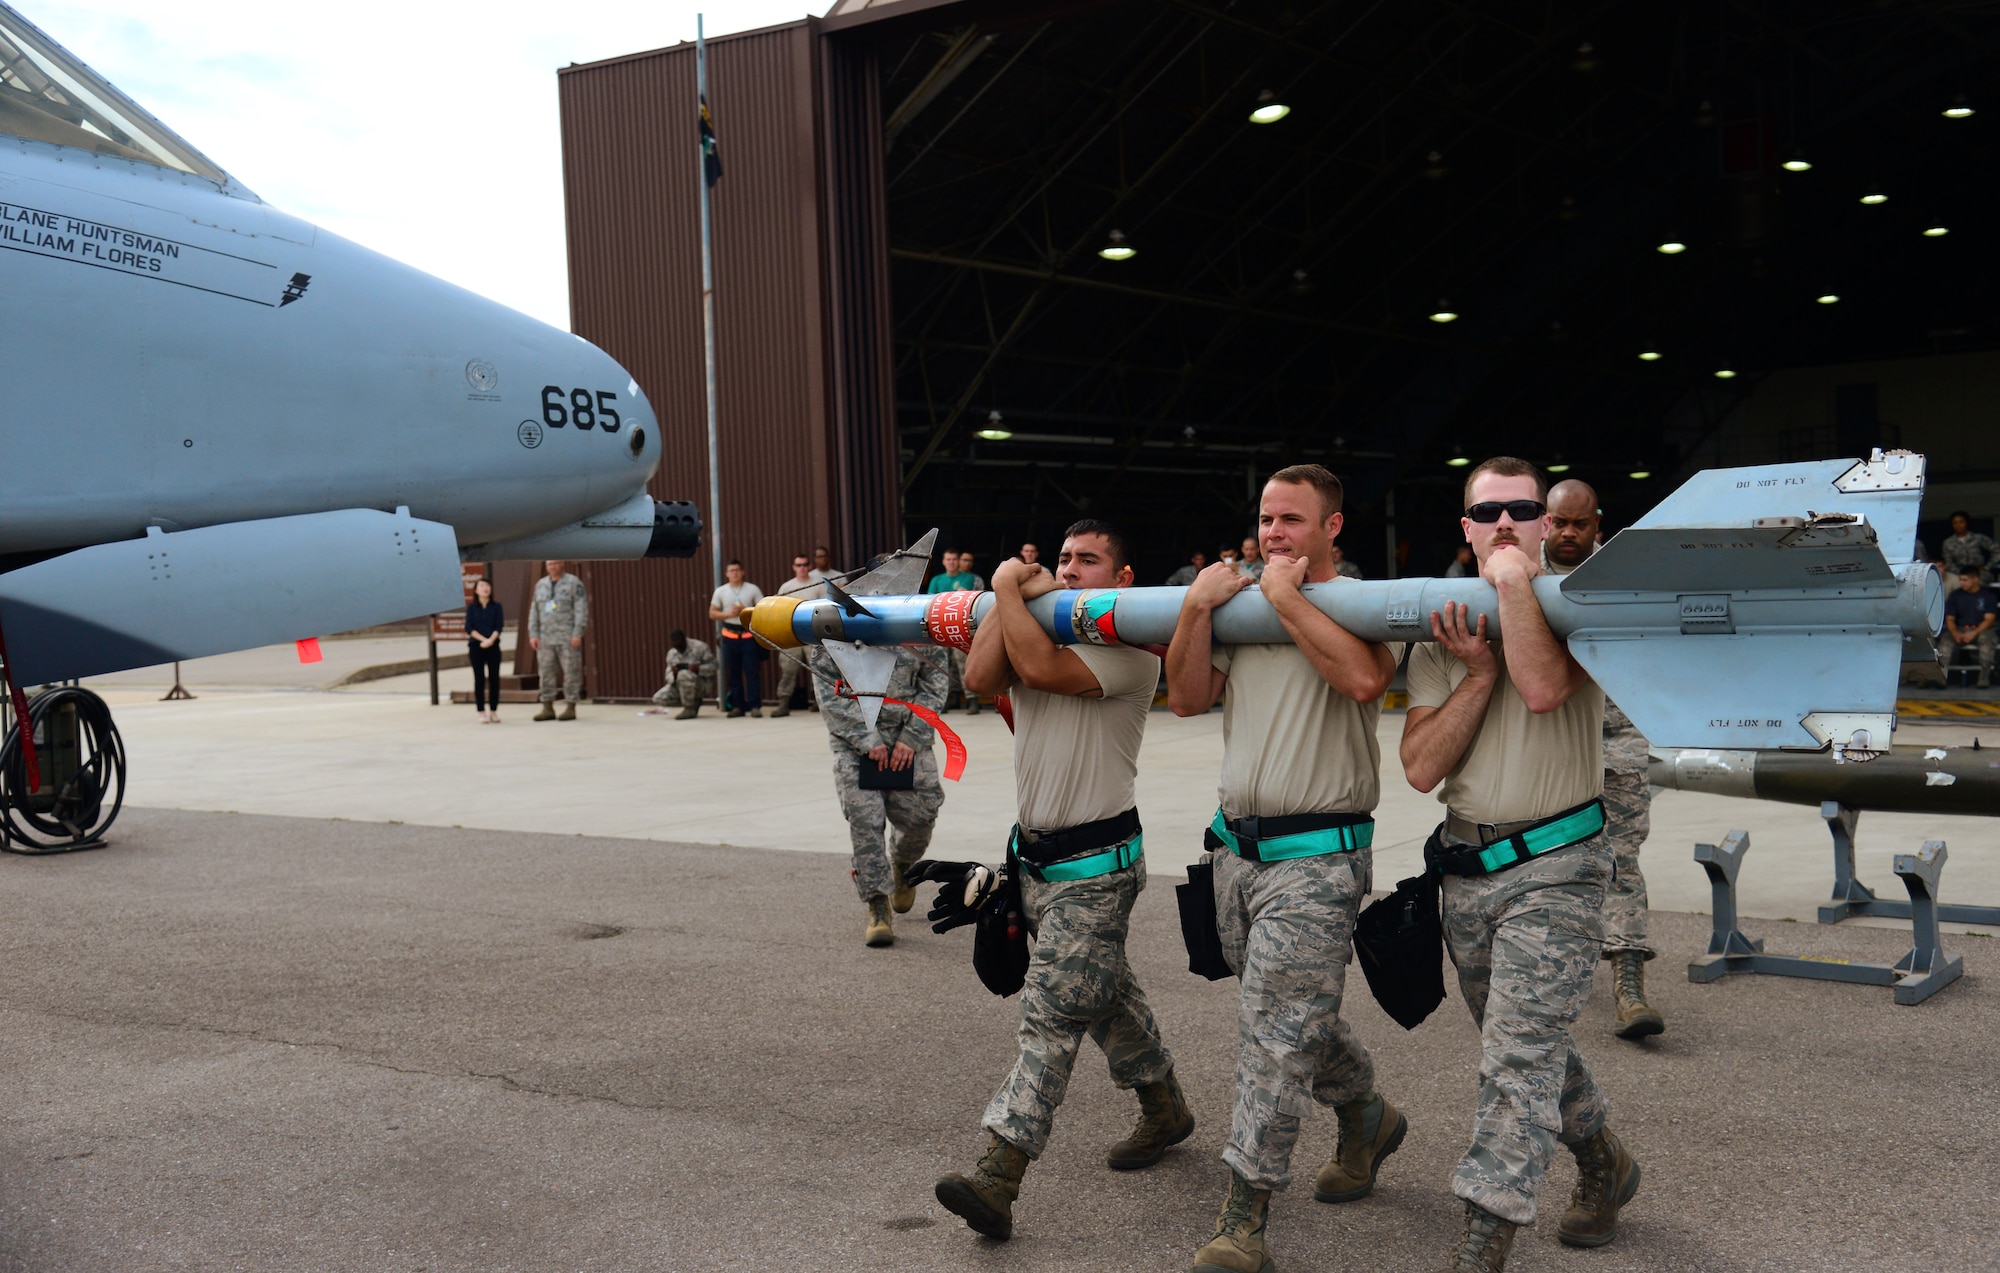 The U.S. Air Force 25th Aircraft Maintenance Unit load team carries an air-to-air missile to their A-10 Thunderbolt II during the quarterly weapons load competition at Osan Air Base, Republic of Korea, July 10, 2015. The event adds an element of competition to a qualification test for the technicians; competitors must complete a written test and a practical demonstration of skill within a fixed amount of time in order to maintain mission readiness status. (U.S. Air Force photo by Staff Sgt. Amber Grimm/Released)